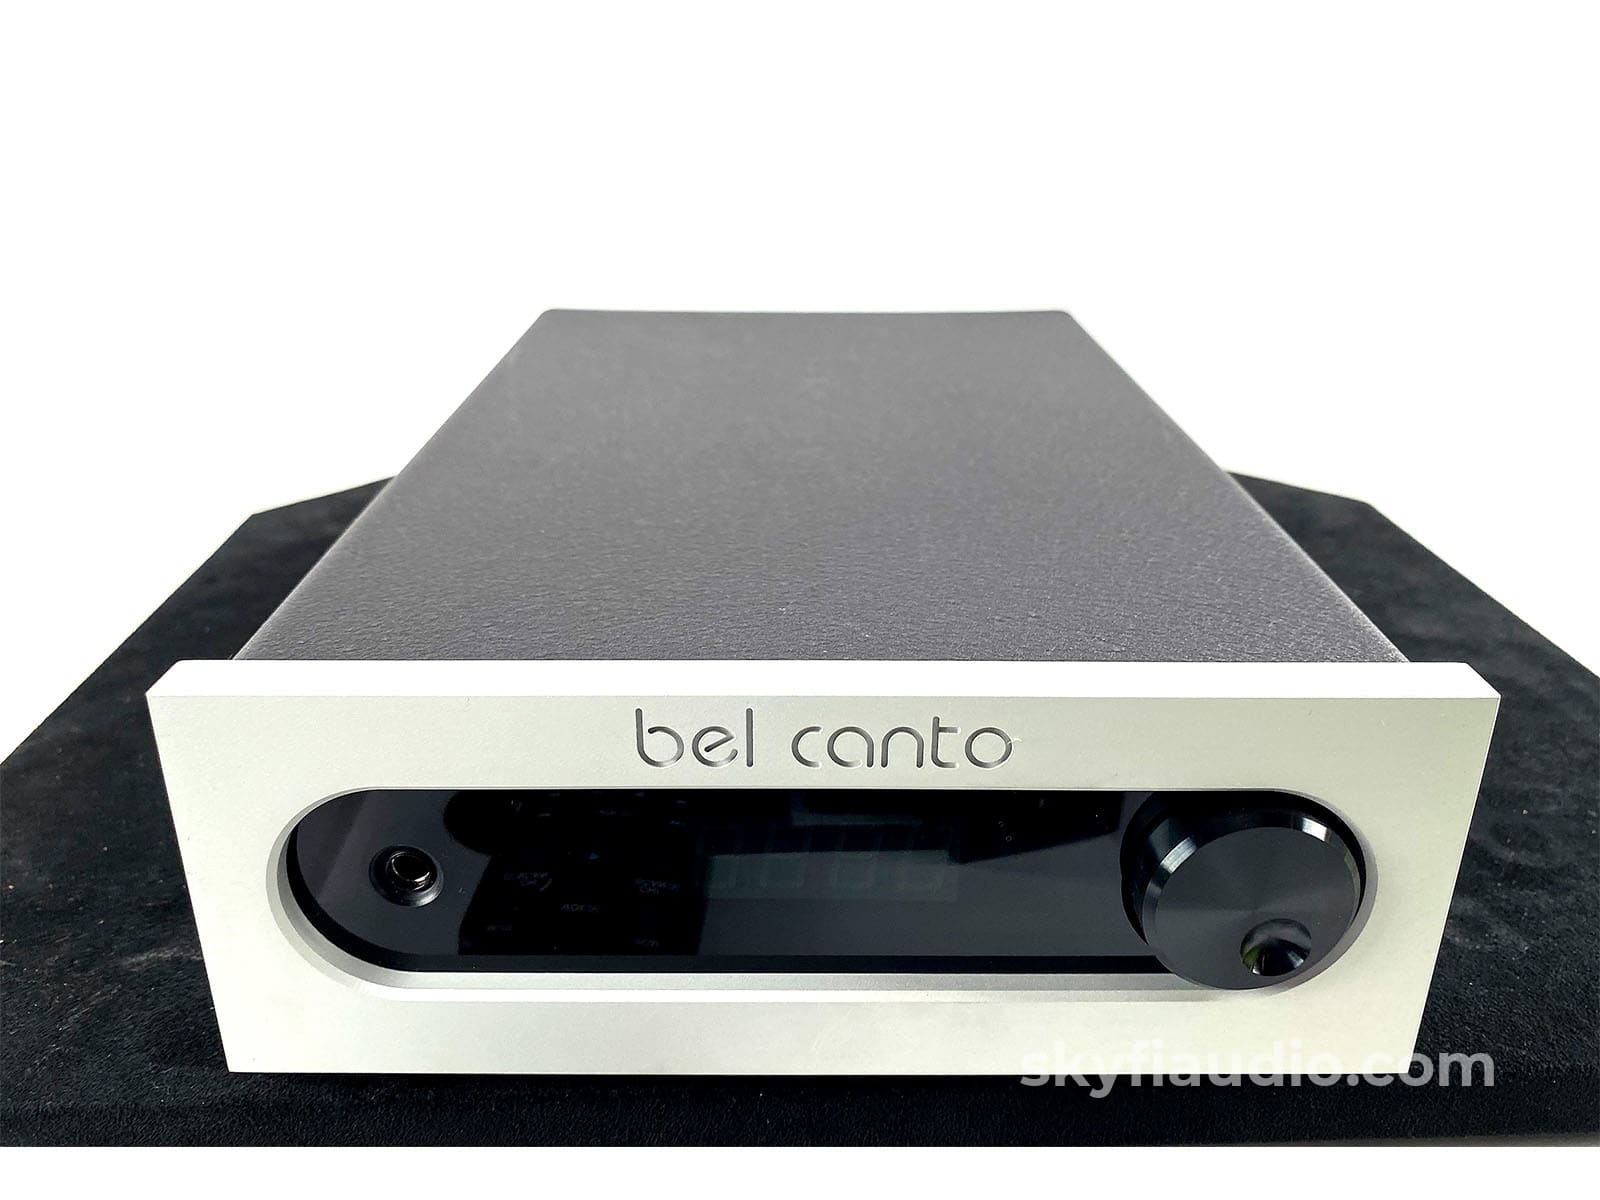 Bel Canto Dac 1.5 Upsampling Audio With Remote And Manual Cd + Digital